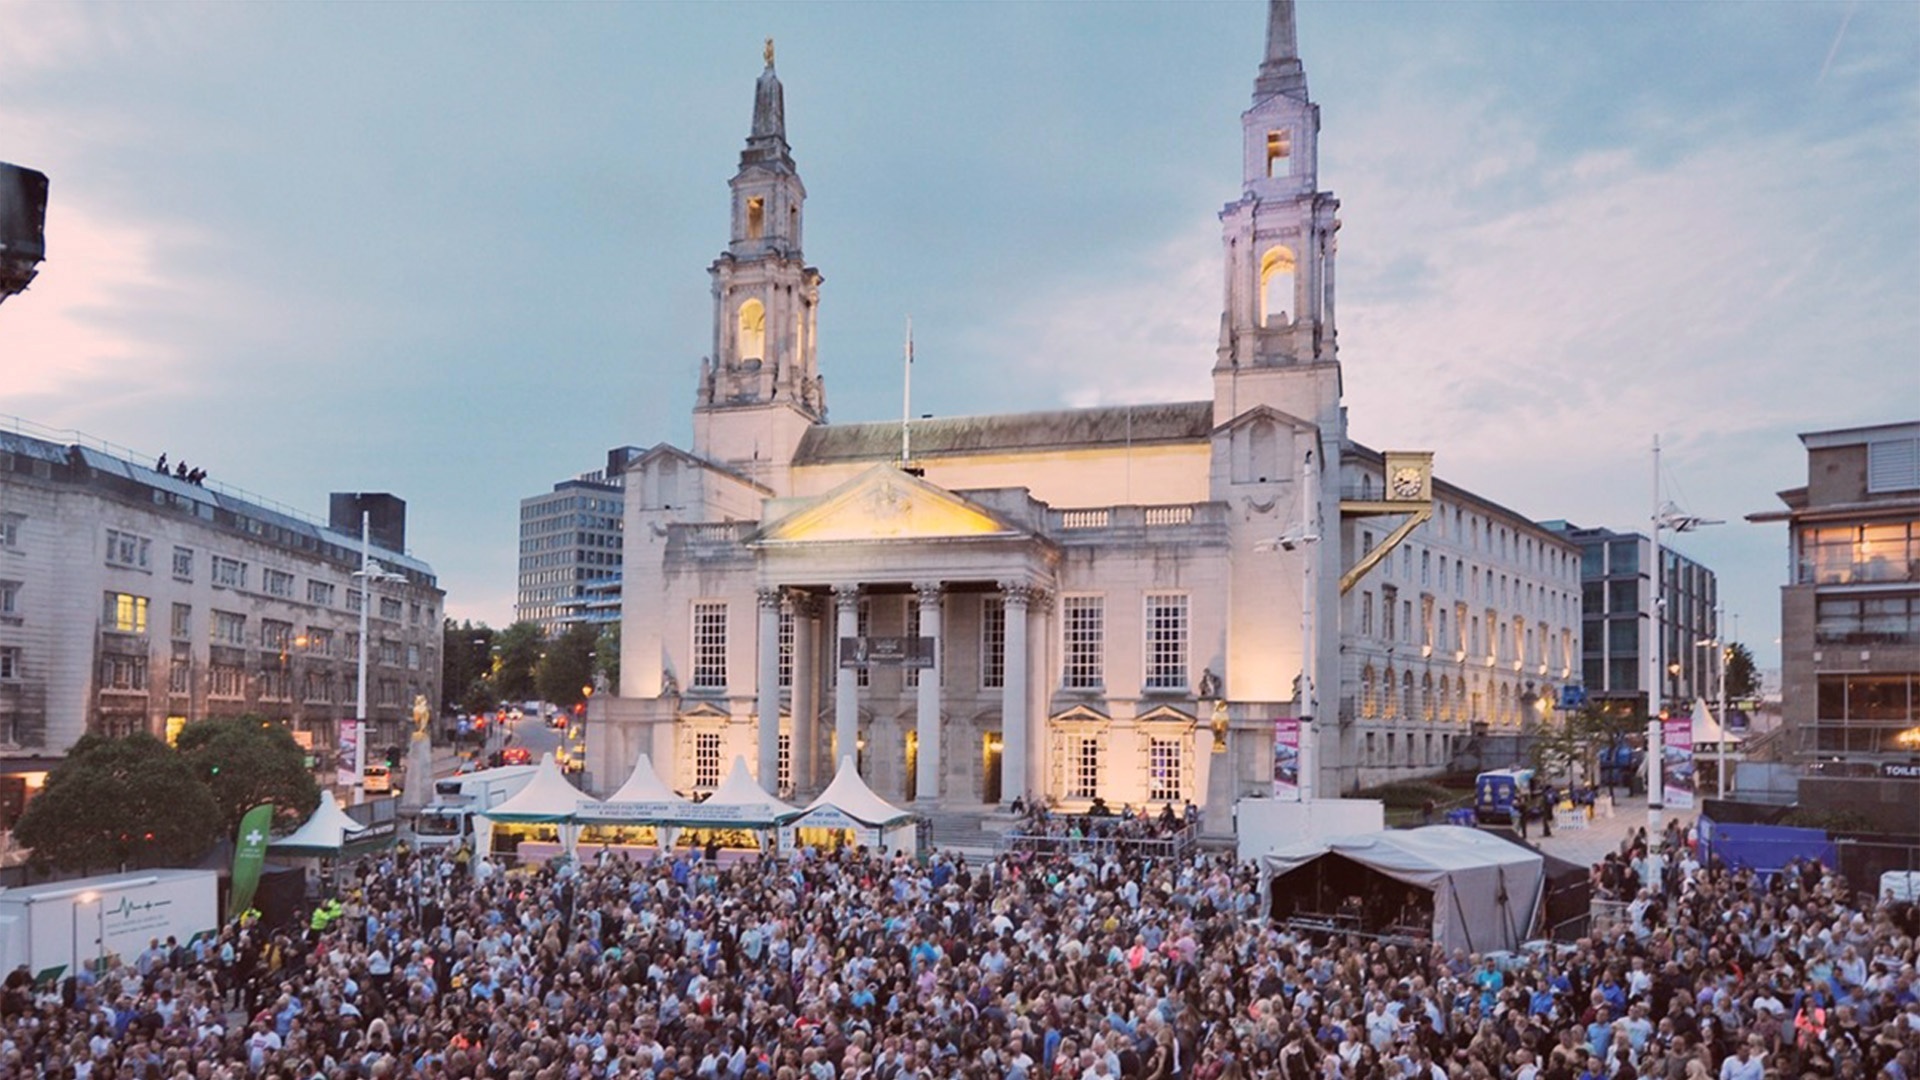 Crowd at Millennium Square seen from the main stage with Leeds Civic Hall in the background.